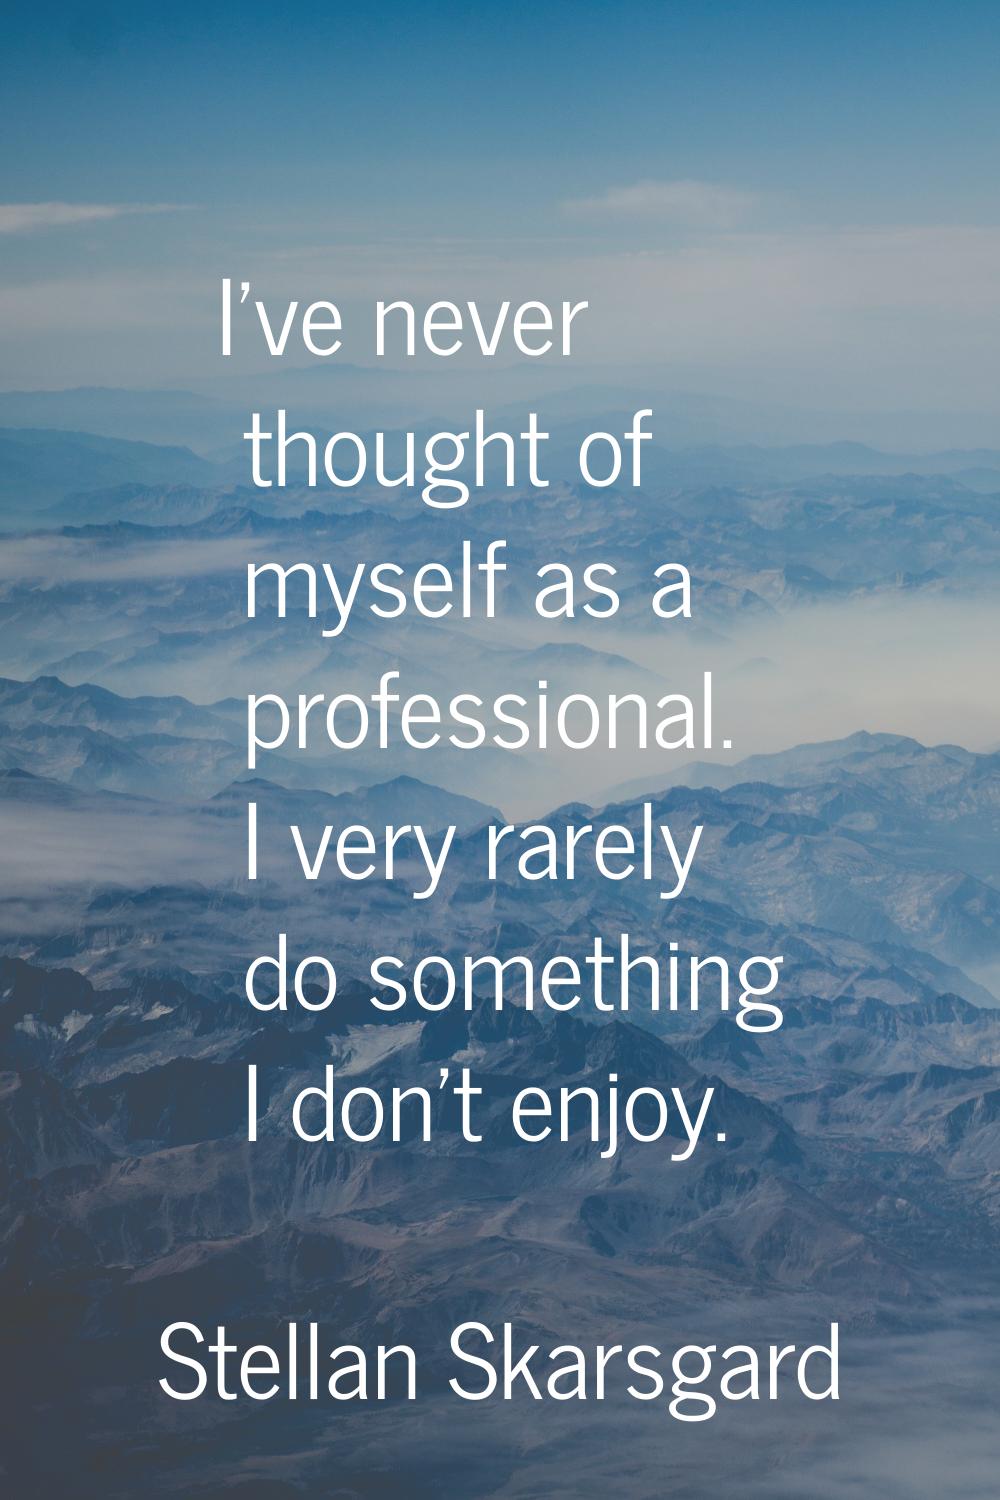 I've never thought of myself as a professional. I very rarely do something I don't enjoy.